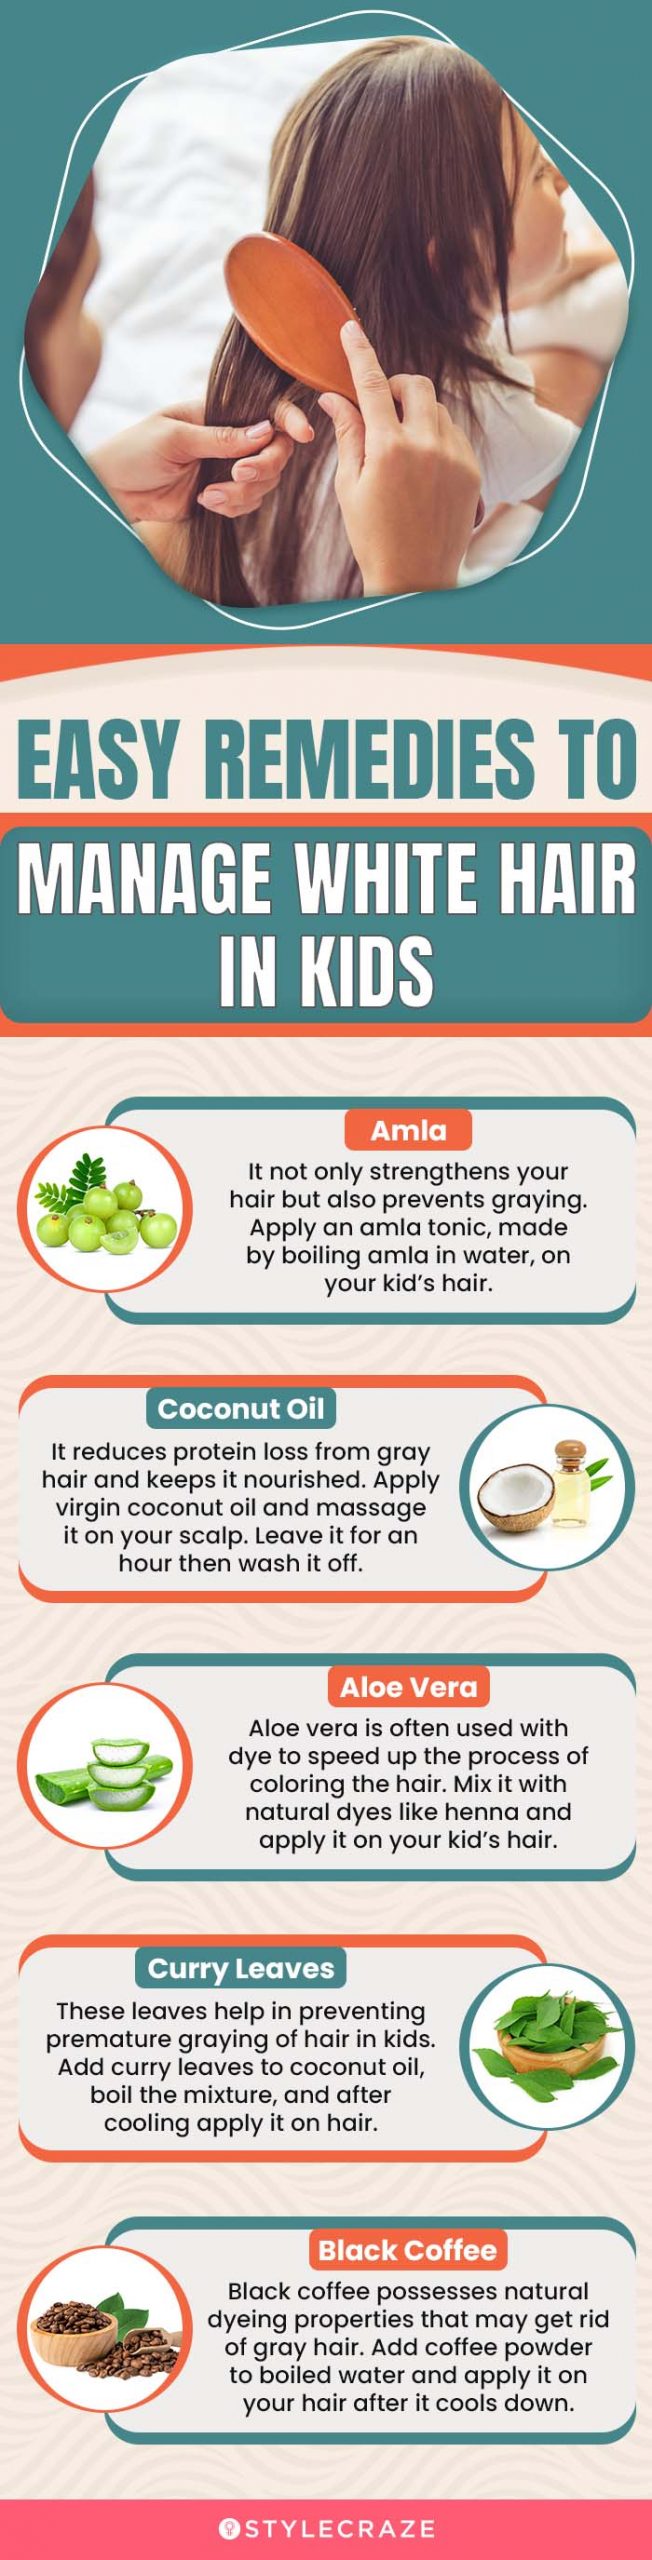 easy remedies to manage white hair in kids (infographic)